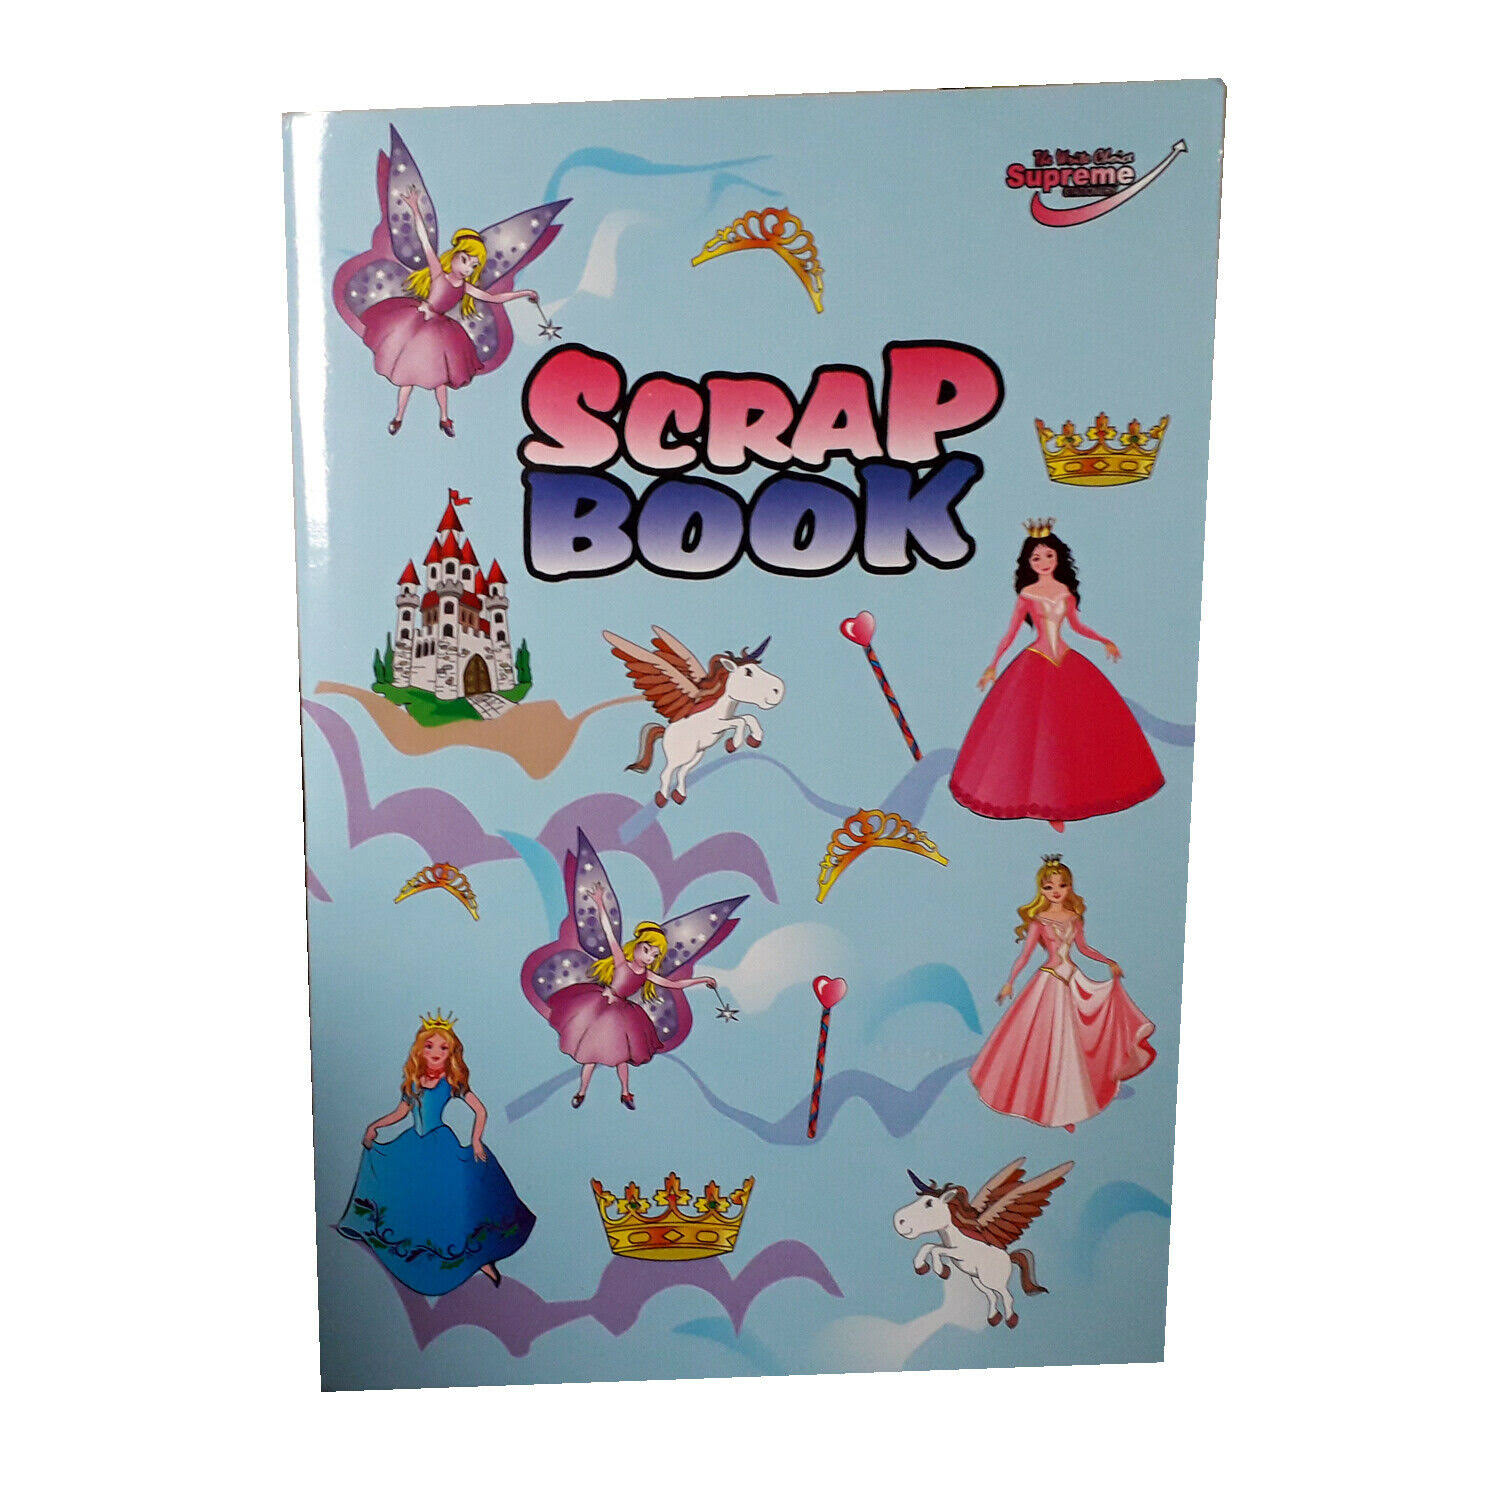 Scrapbook 48 Coloured Pages 100 GSM for Art and Craft - 24 Sheets Size 9" x 13"